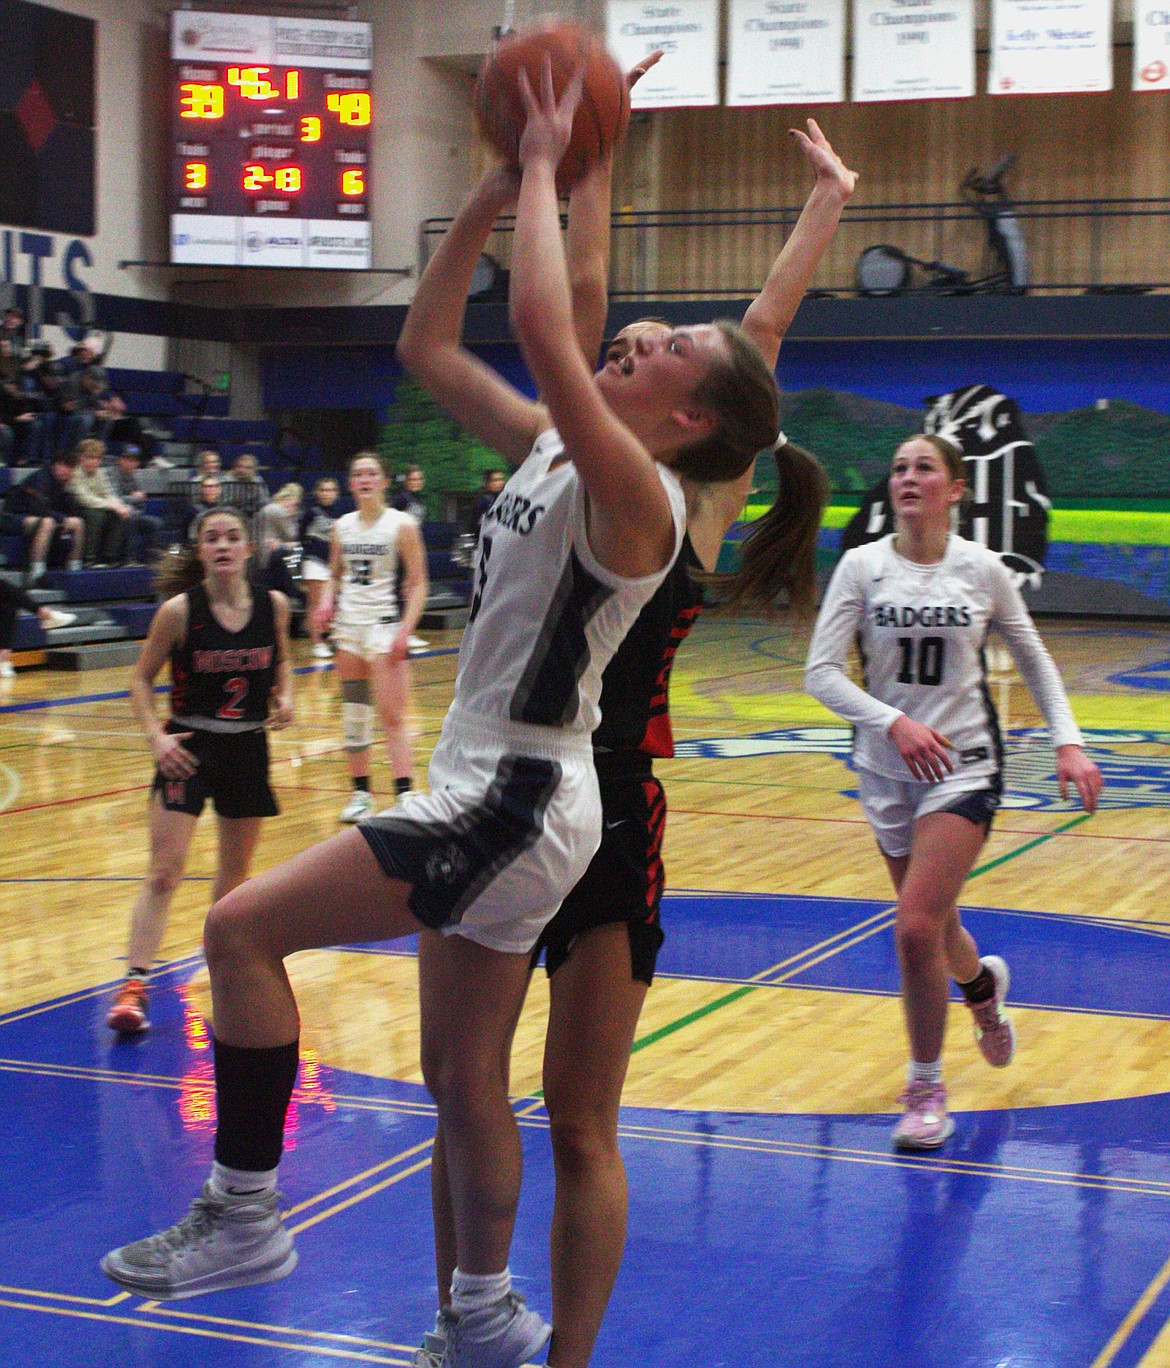 Rylie Kimball with a lay in off a fast break against Moscow earlier in the season.